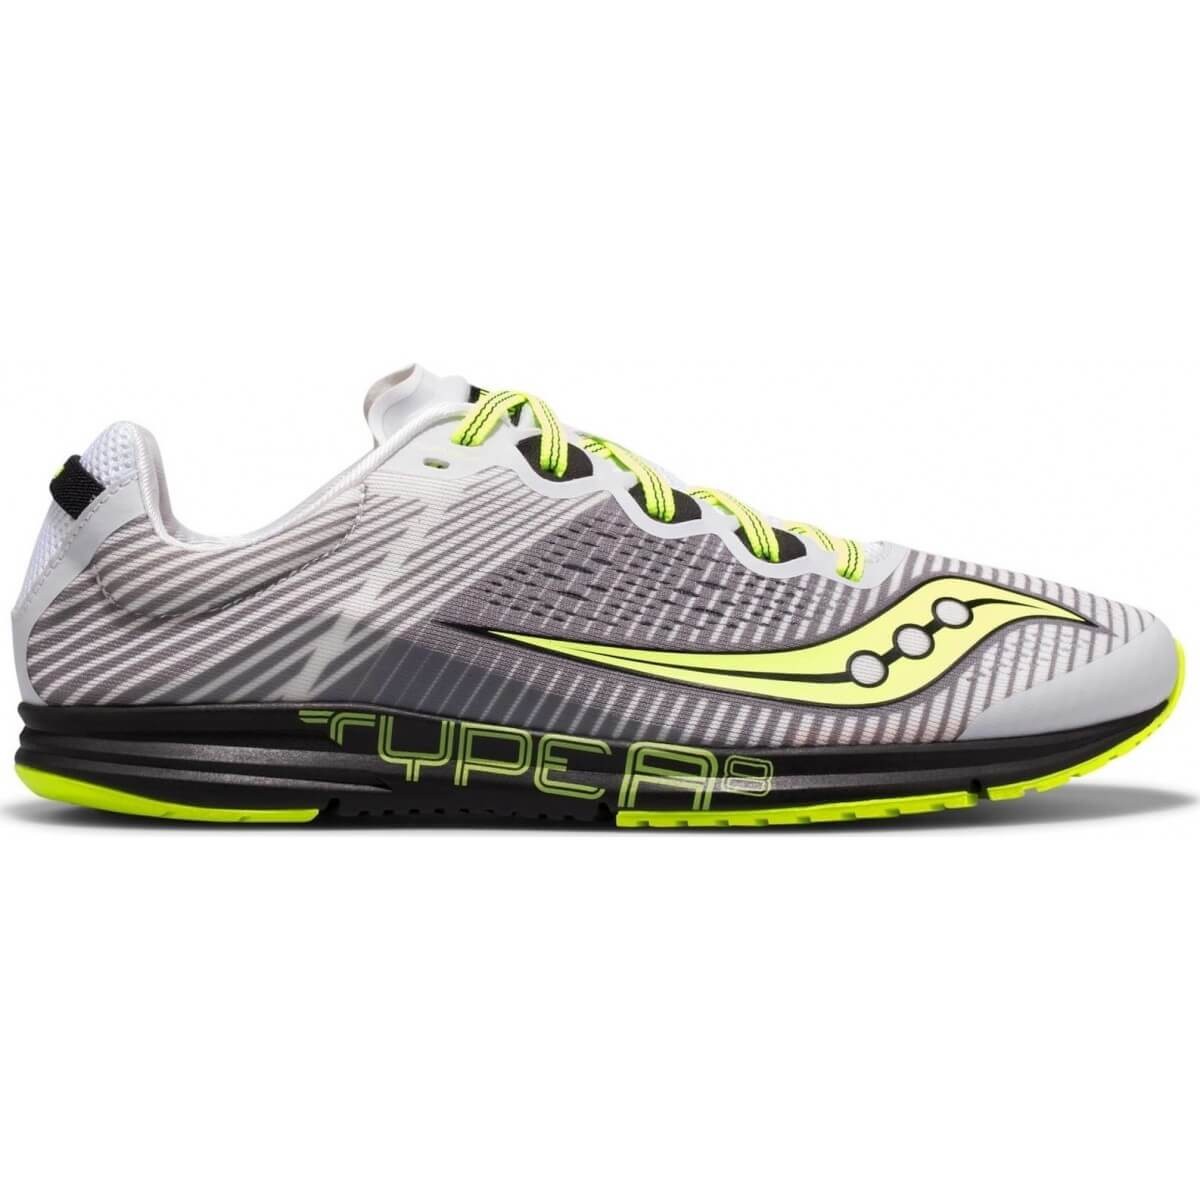 saucony type a8 running shoes